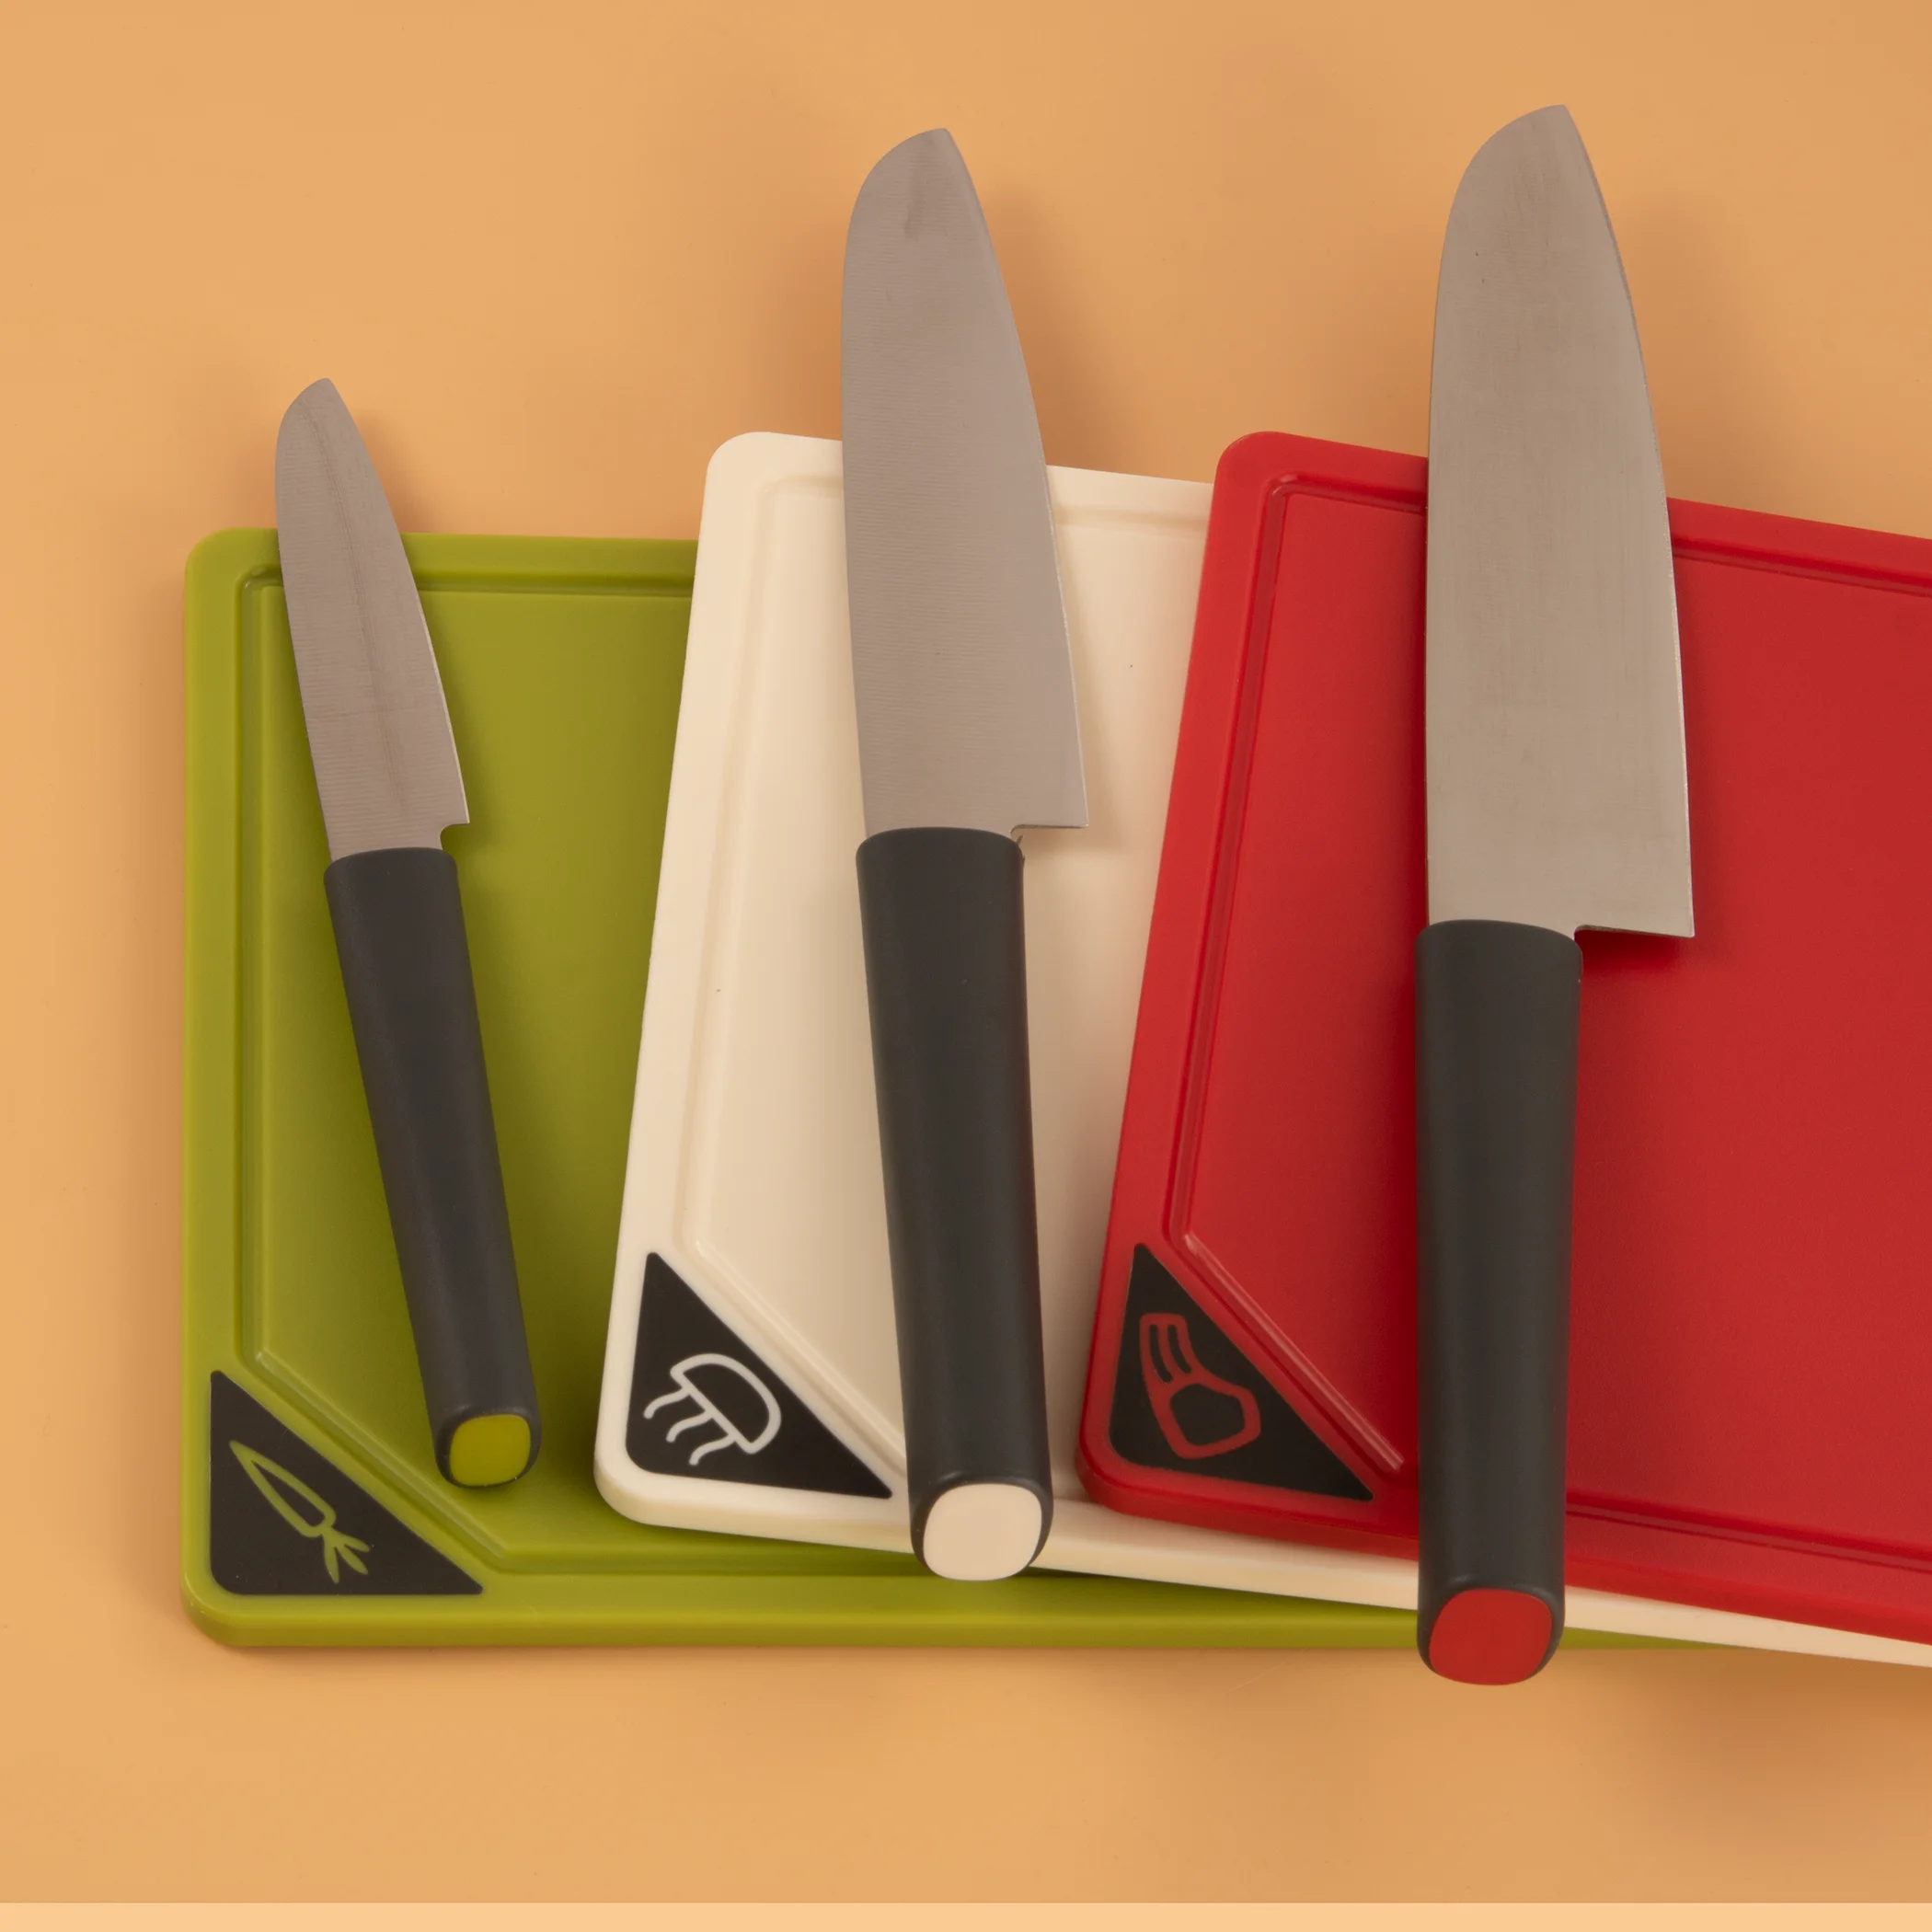 Multifunctional Cutting Board And Knife Set With Separate Cutting Boards For Raw And Cooked Food